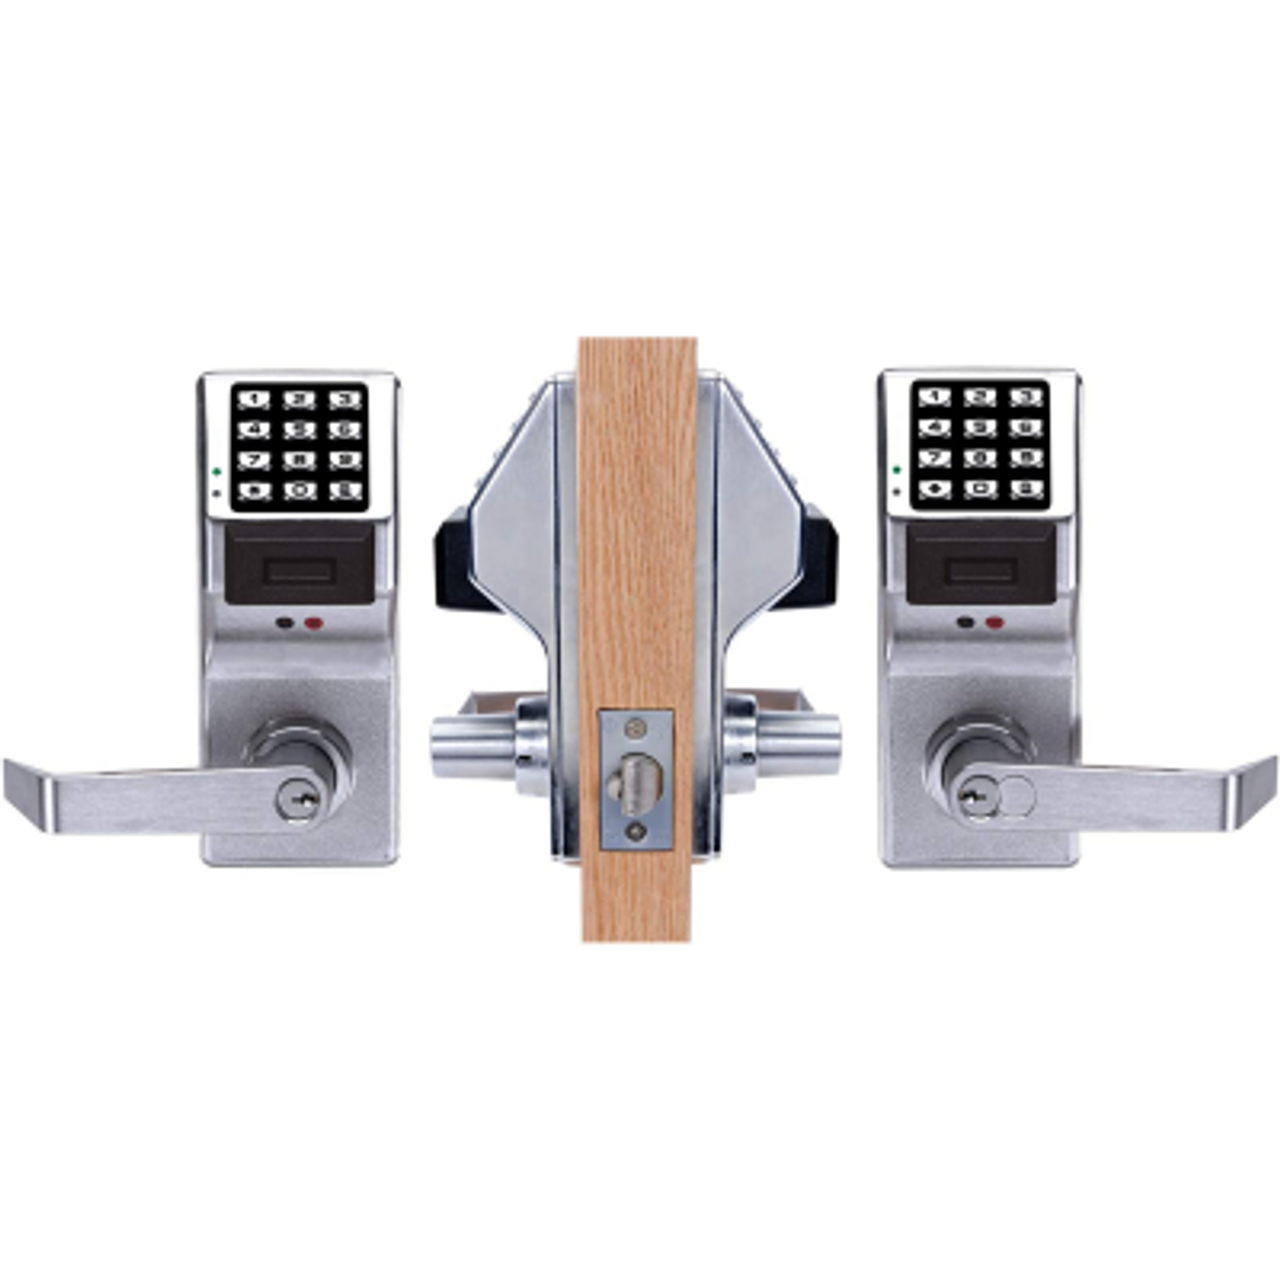 Alarm Lock Trilogy DL5300 Double Sided Electronic Keyless Access Cylindrical Lock, 2000 Users, with or without Prox Reader